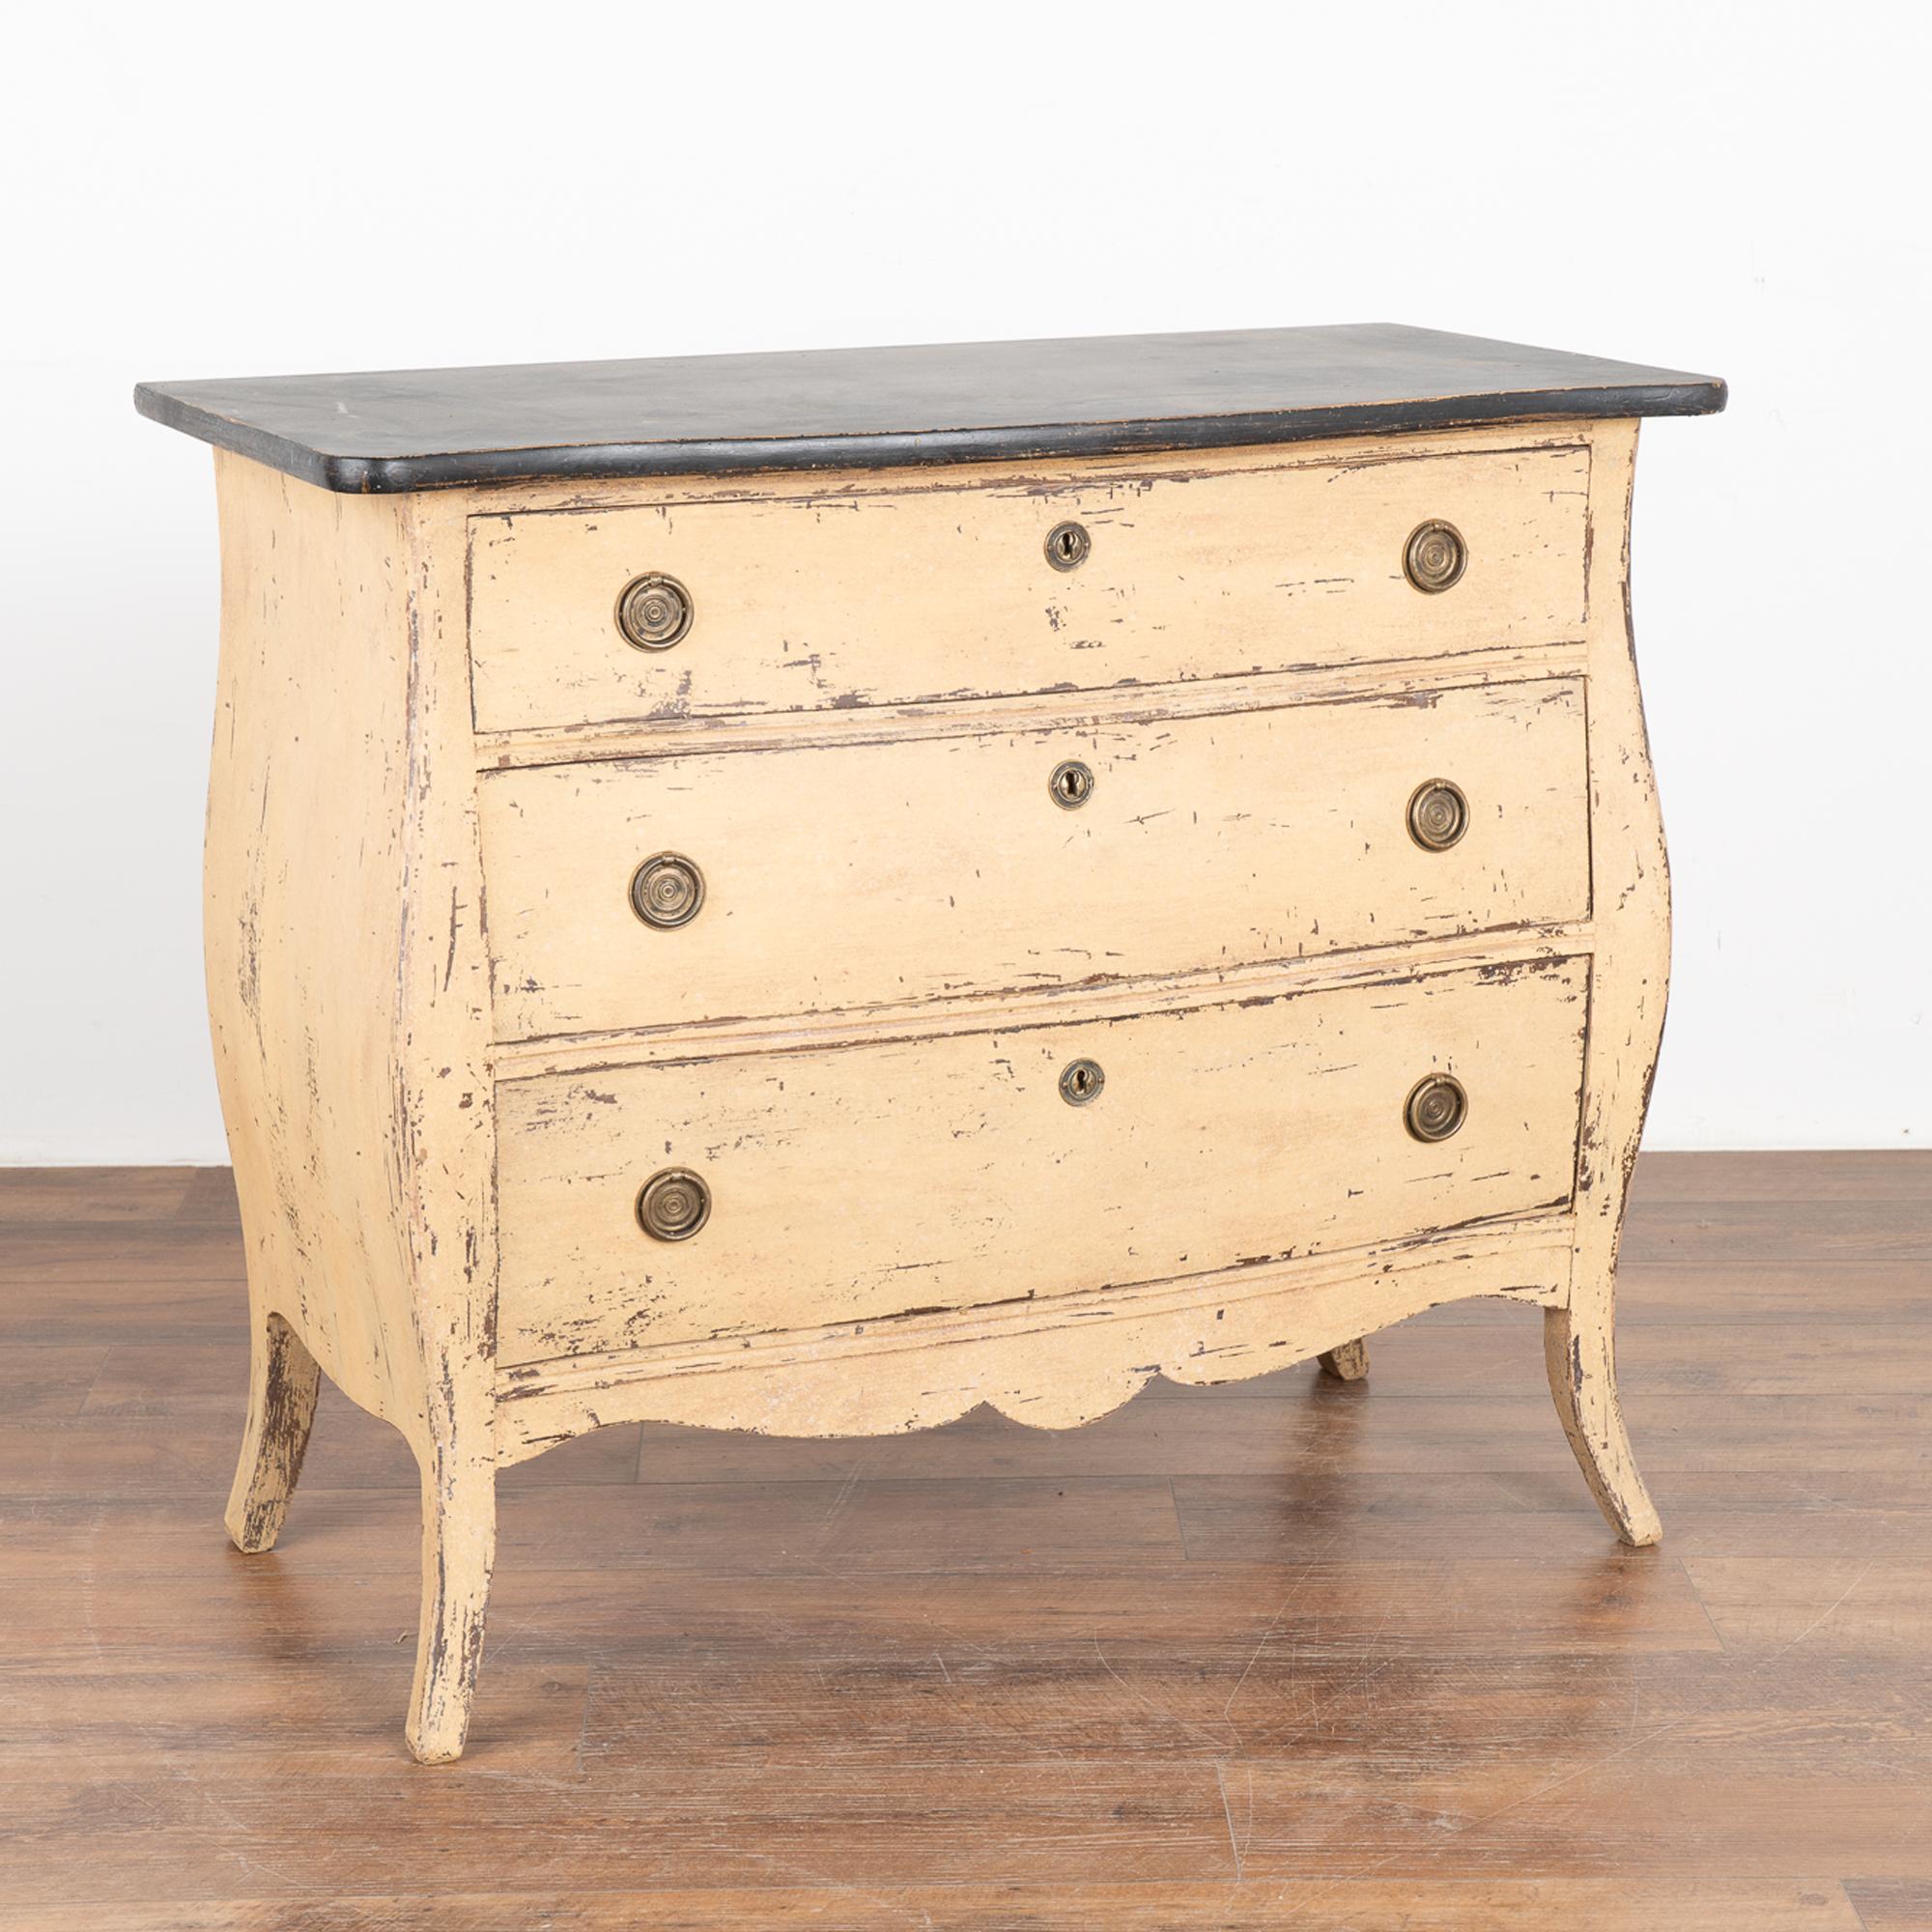 It is the slight bombay curves and feet turning gently outwards that draws one to this charming chest of drawers.
Restored, later professionally painted in layered shades of pale yellow, cream and white all lightly distressed to fit the age and